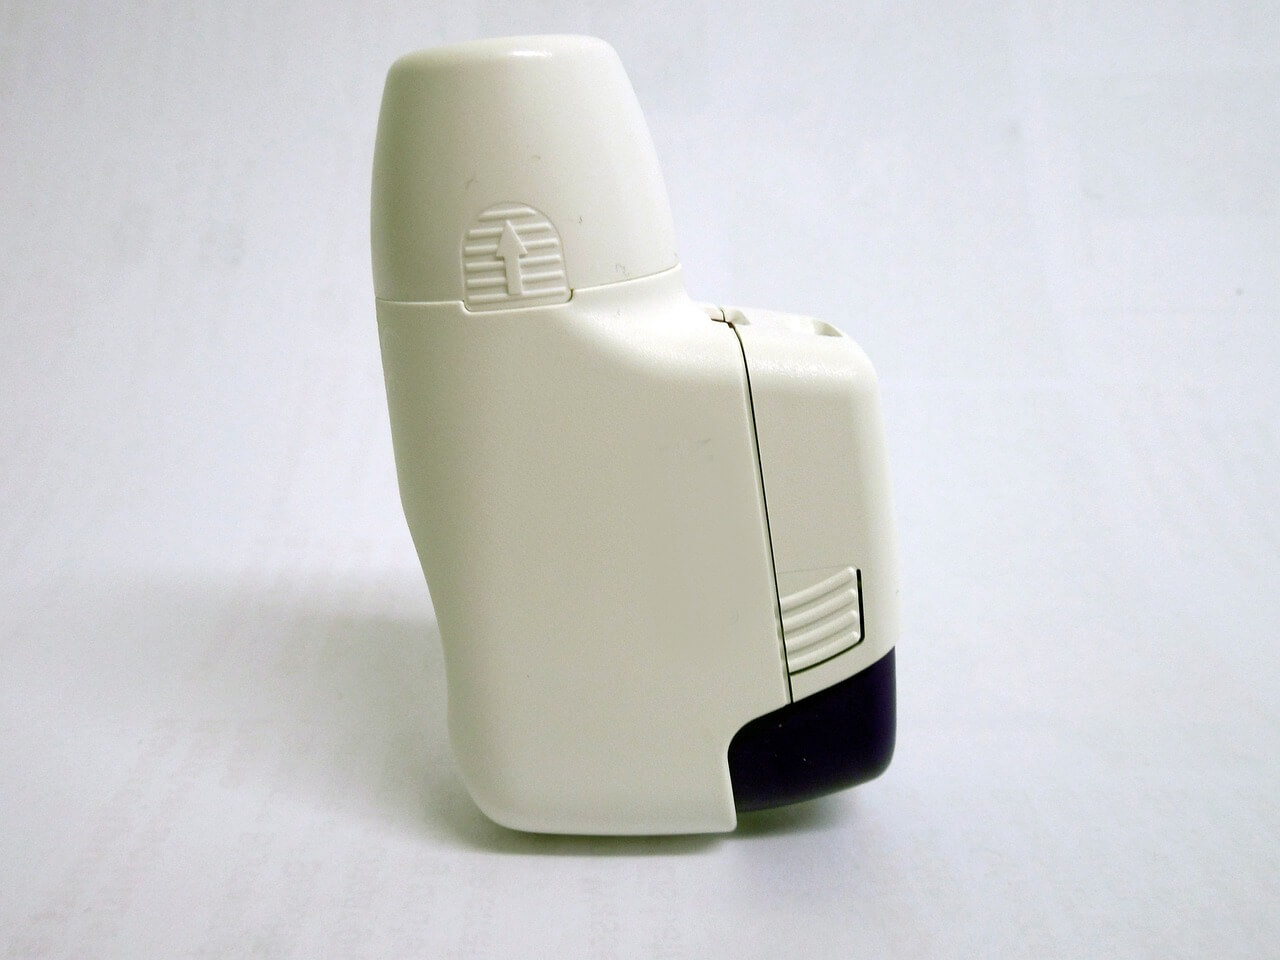 The Future of Dry Powder Inhalers